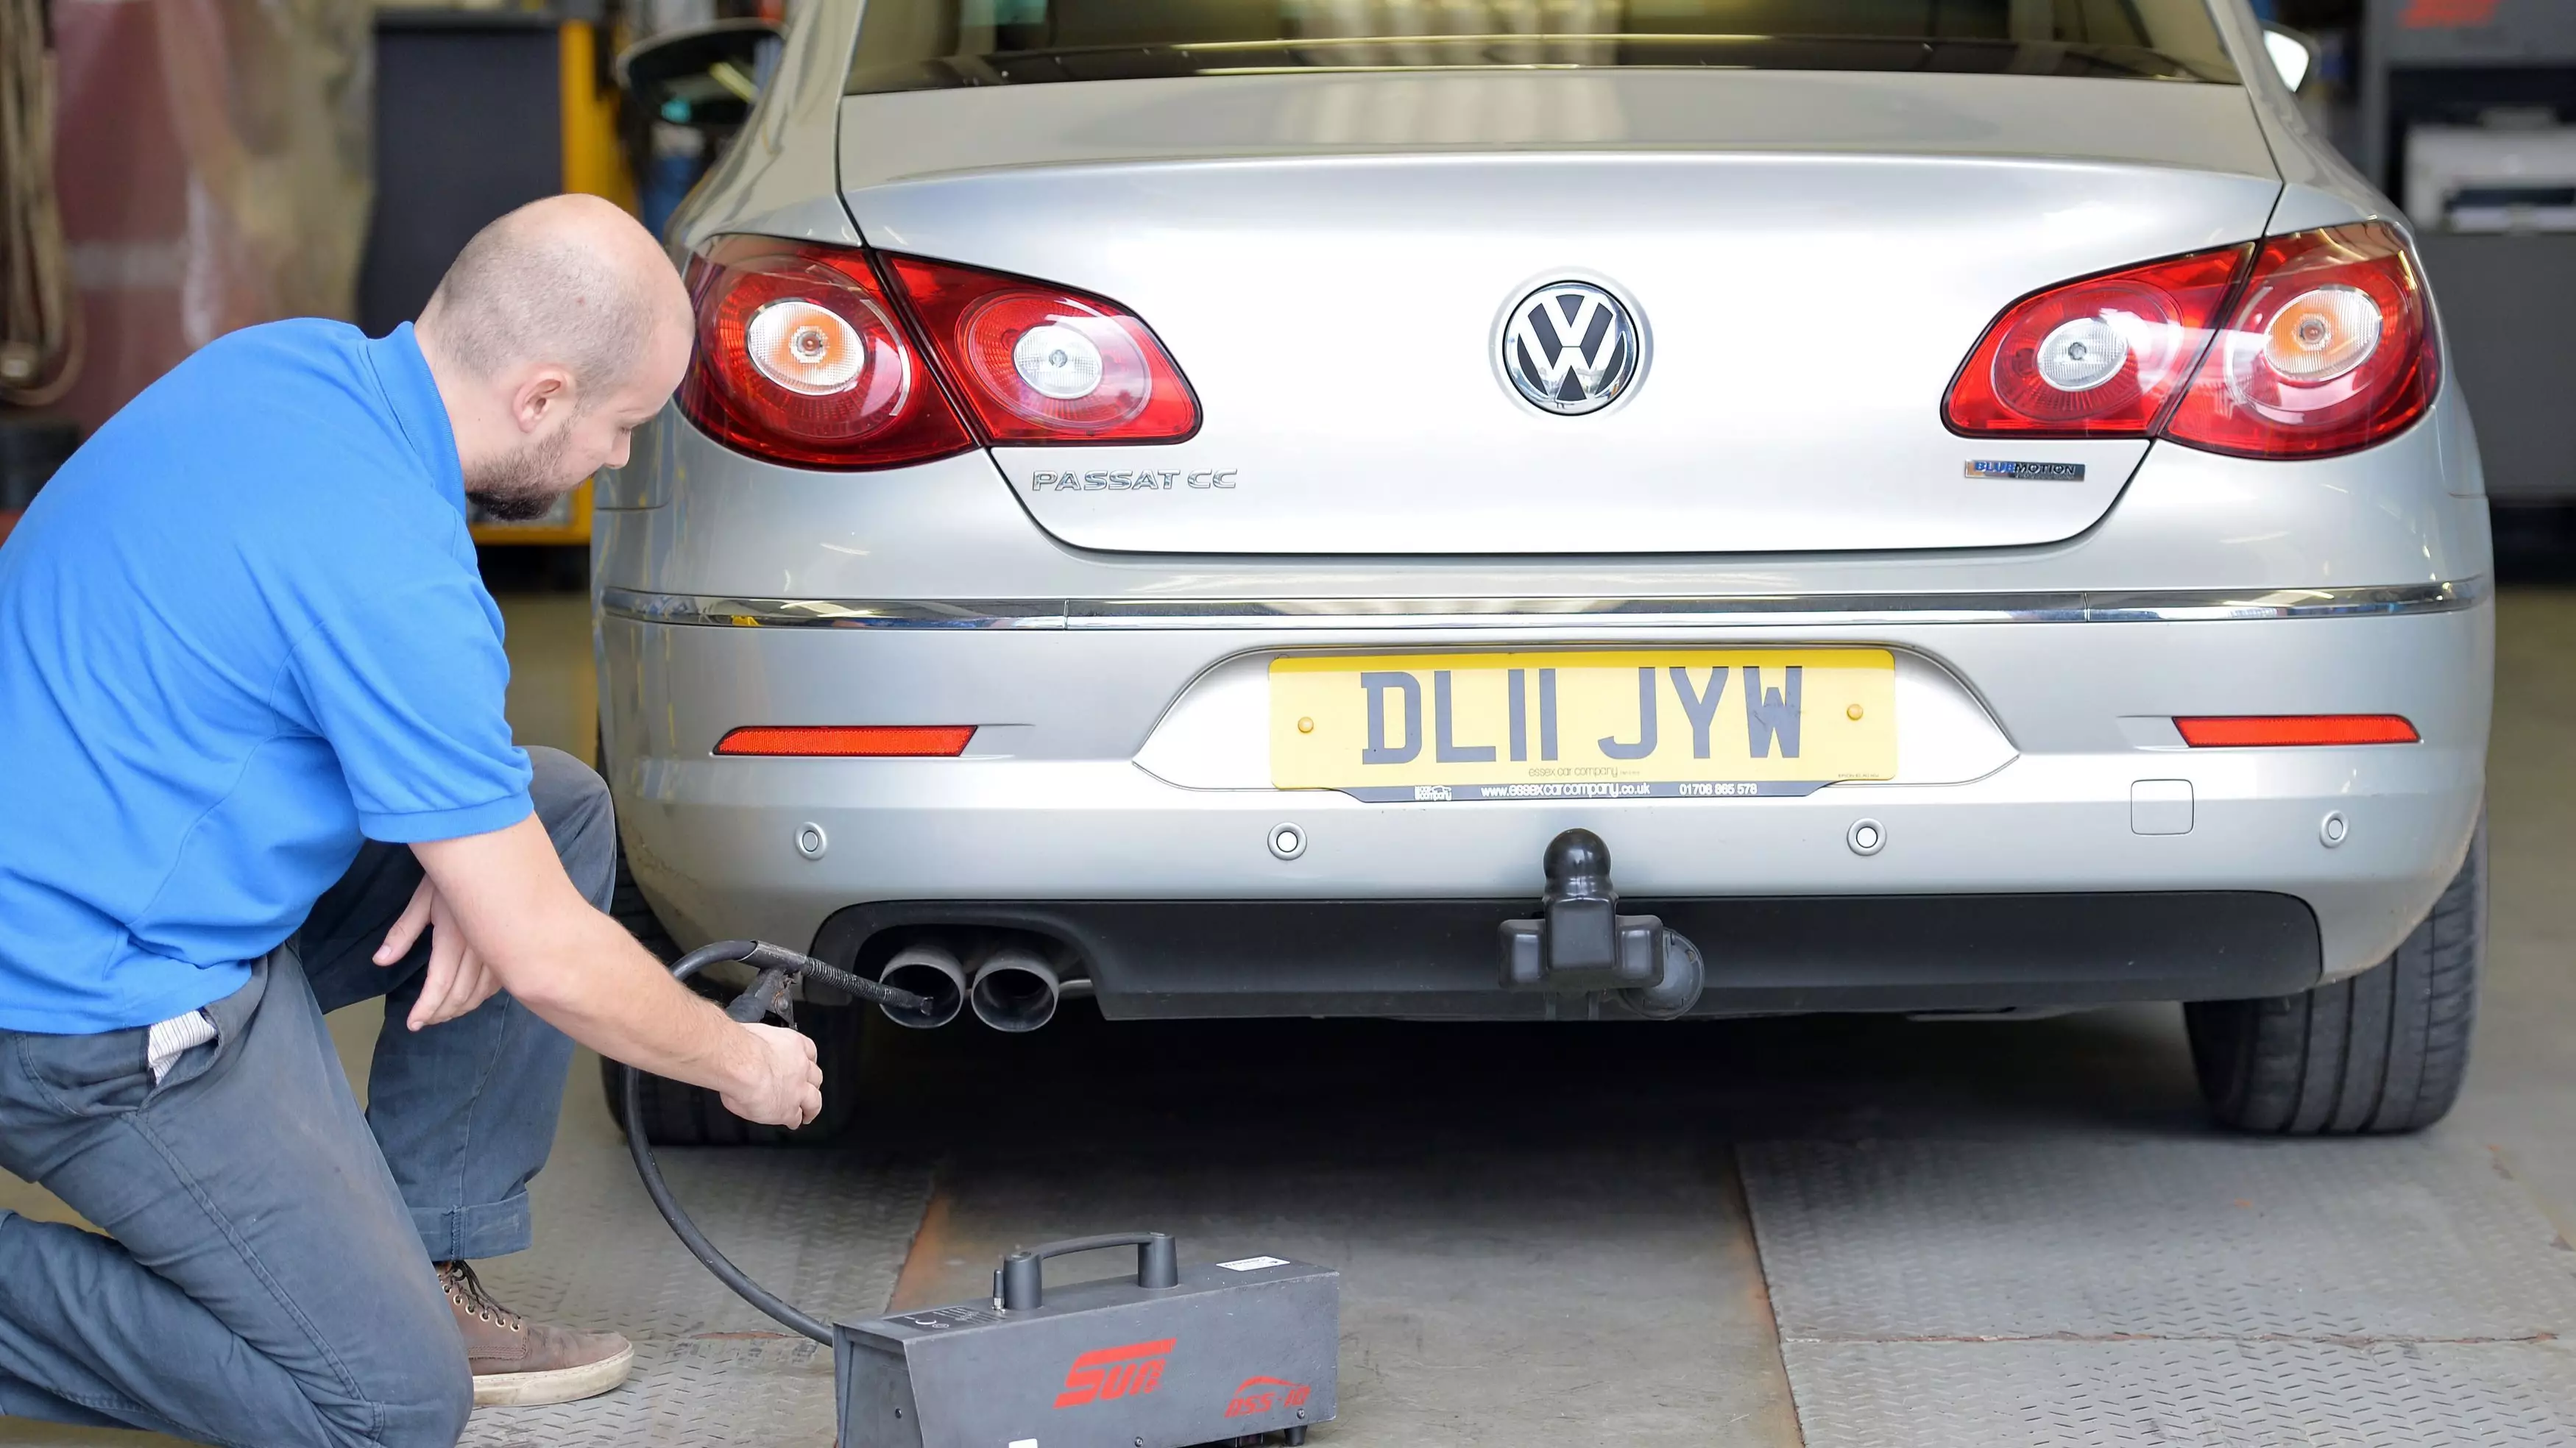 UK Motorists Warned To Watch Out For MOT Loophole Which Could Cost Them £2,500